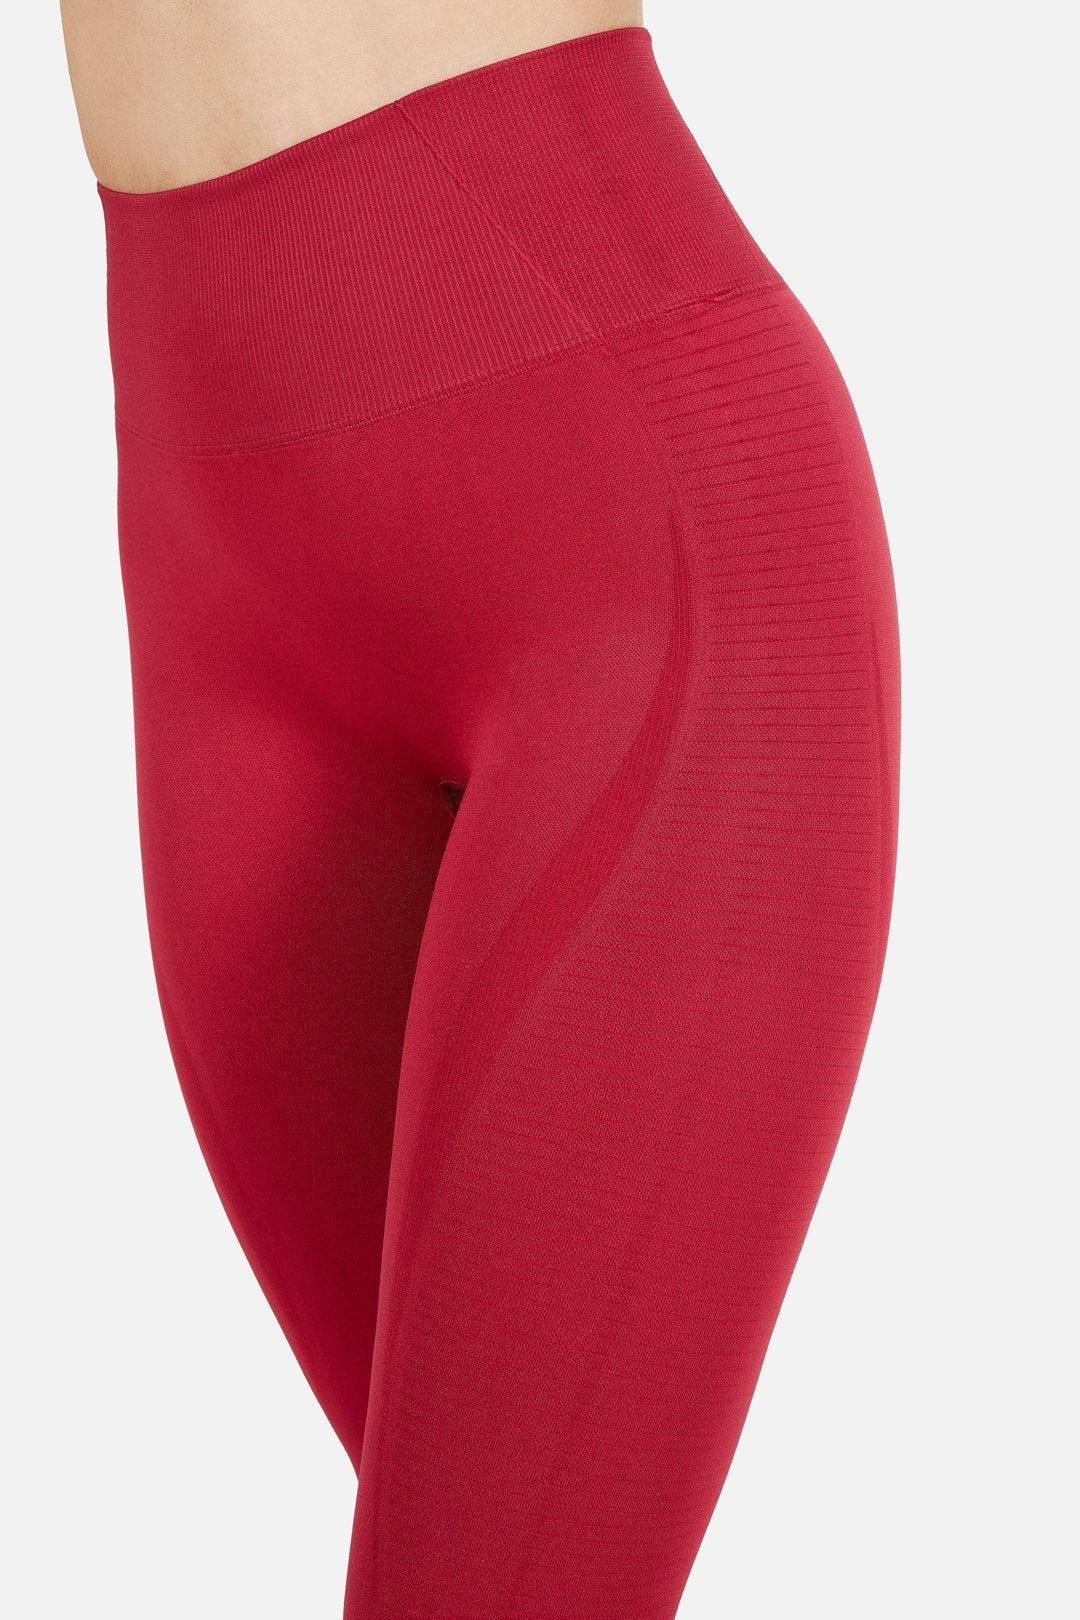 Red Vortex Tights - for dame - Famme - Leggings